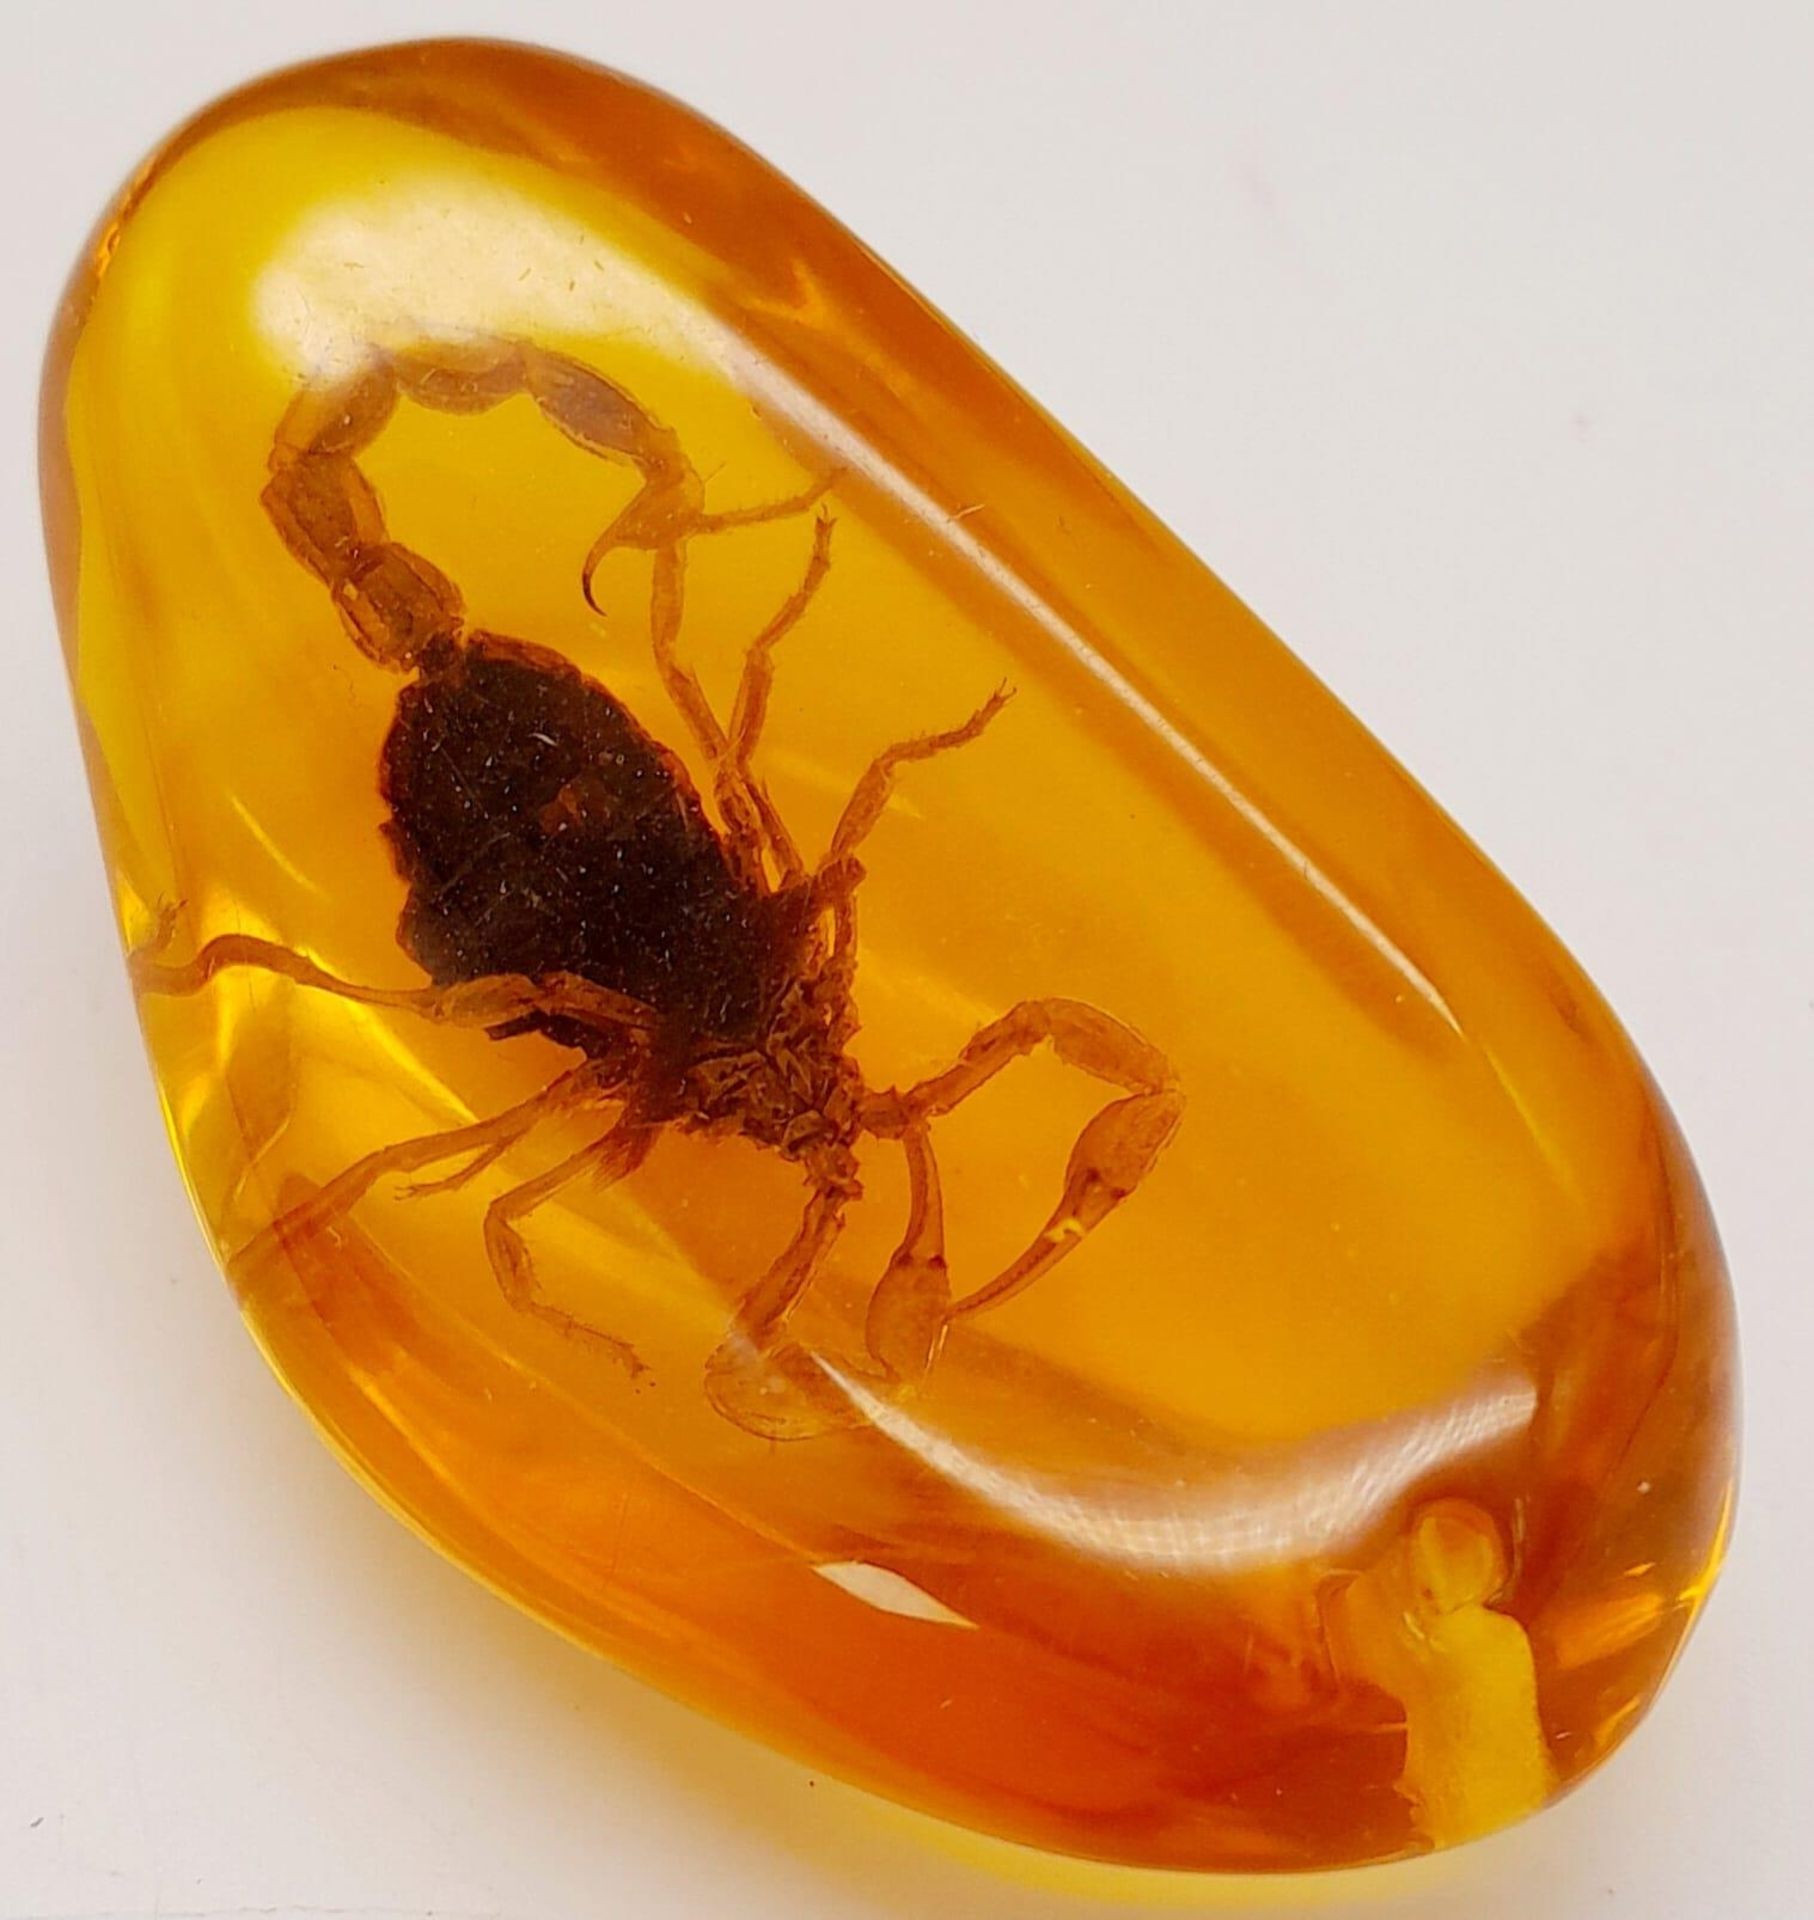 A Tail of the Unexpected! The Scorpion now Resides in an Amber Resin Prison for all of Eternity. - Image 3 of 4